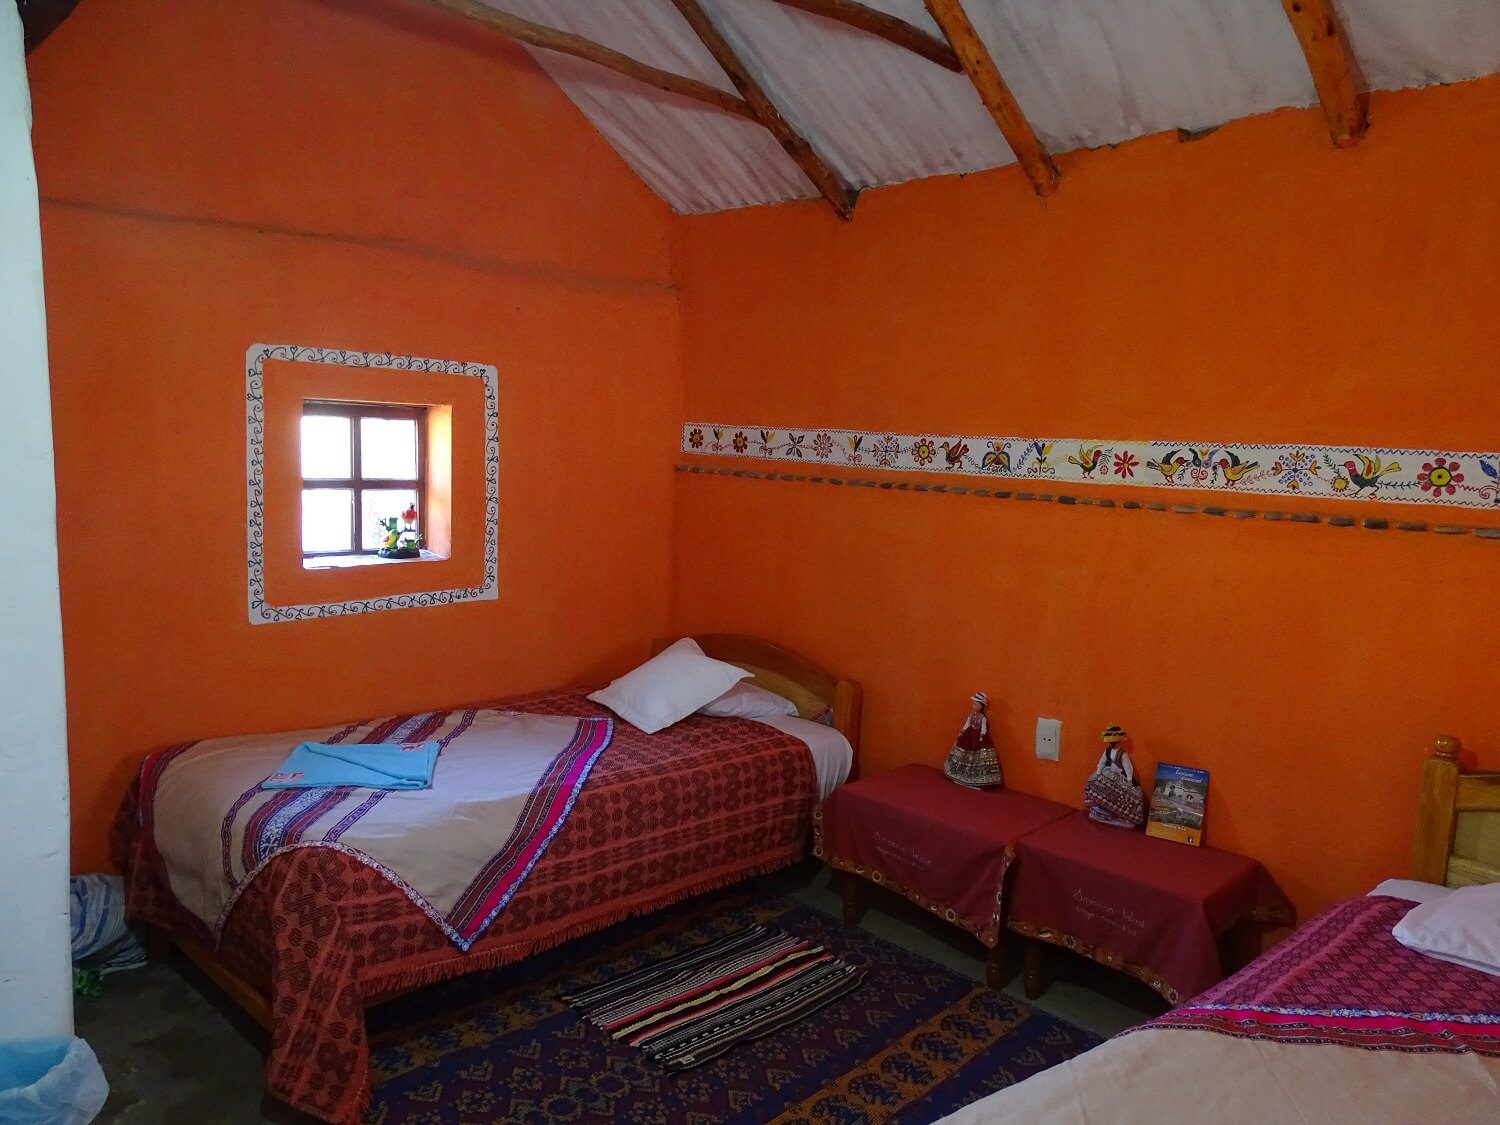 11One of the rooms in the homestay in Sibayo, Colca Canyon. Community-Based Tourism in Peru. | RESPONSible Travel Peru